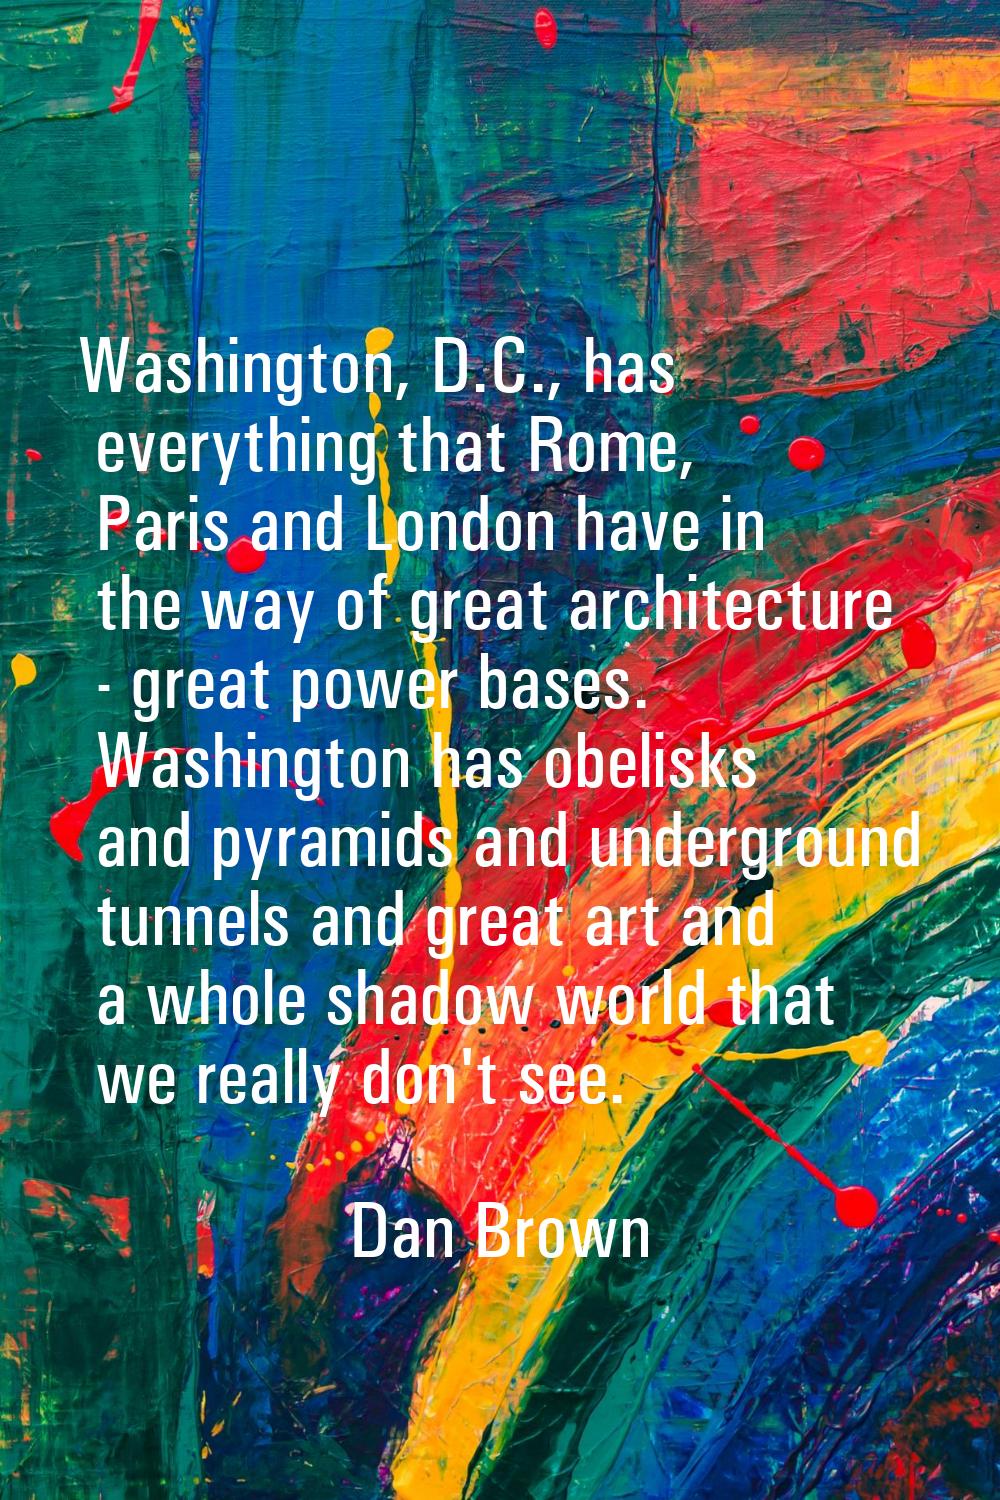 Washington, D.C., has everything that Rome, Paris and London have in the way of great architecture 